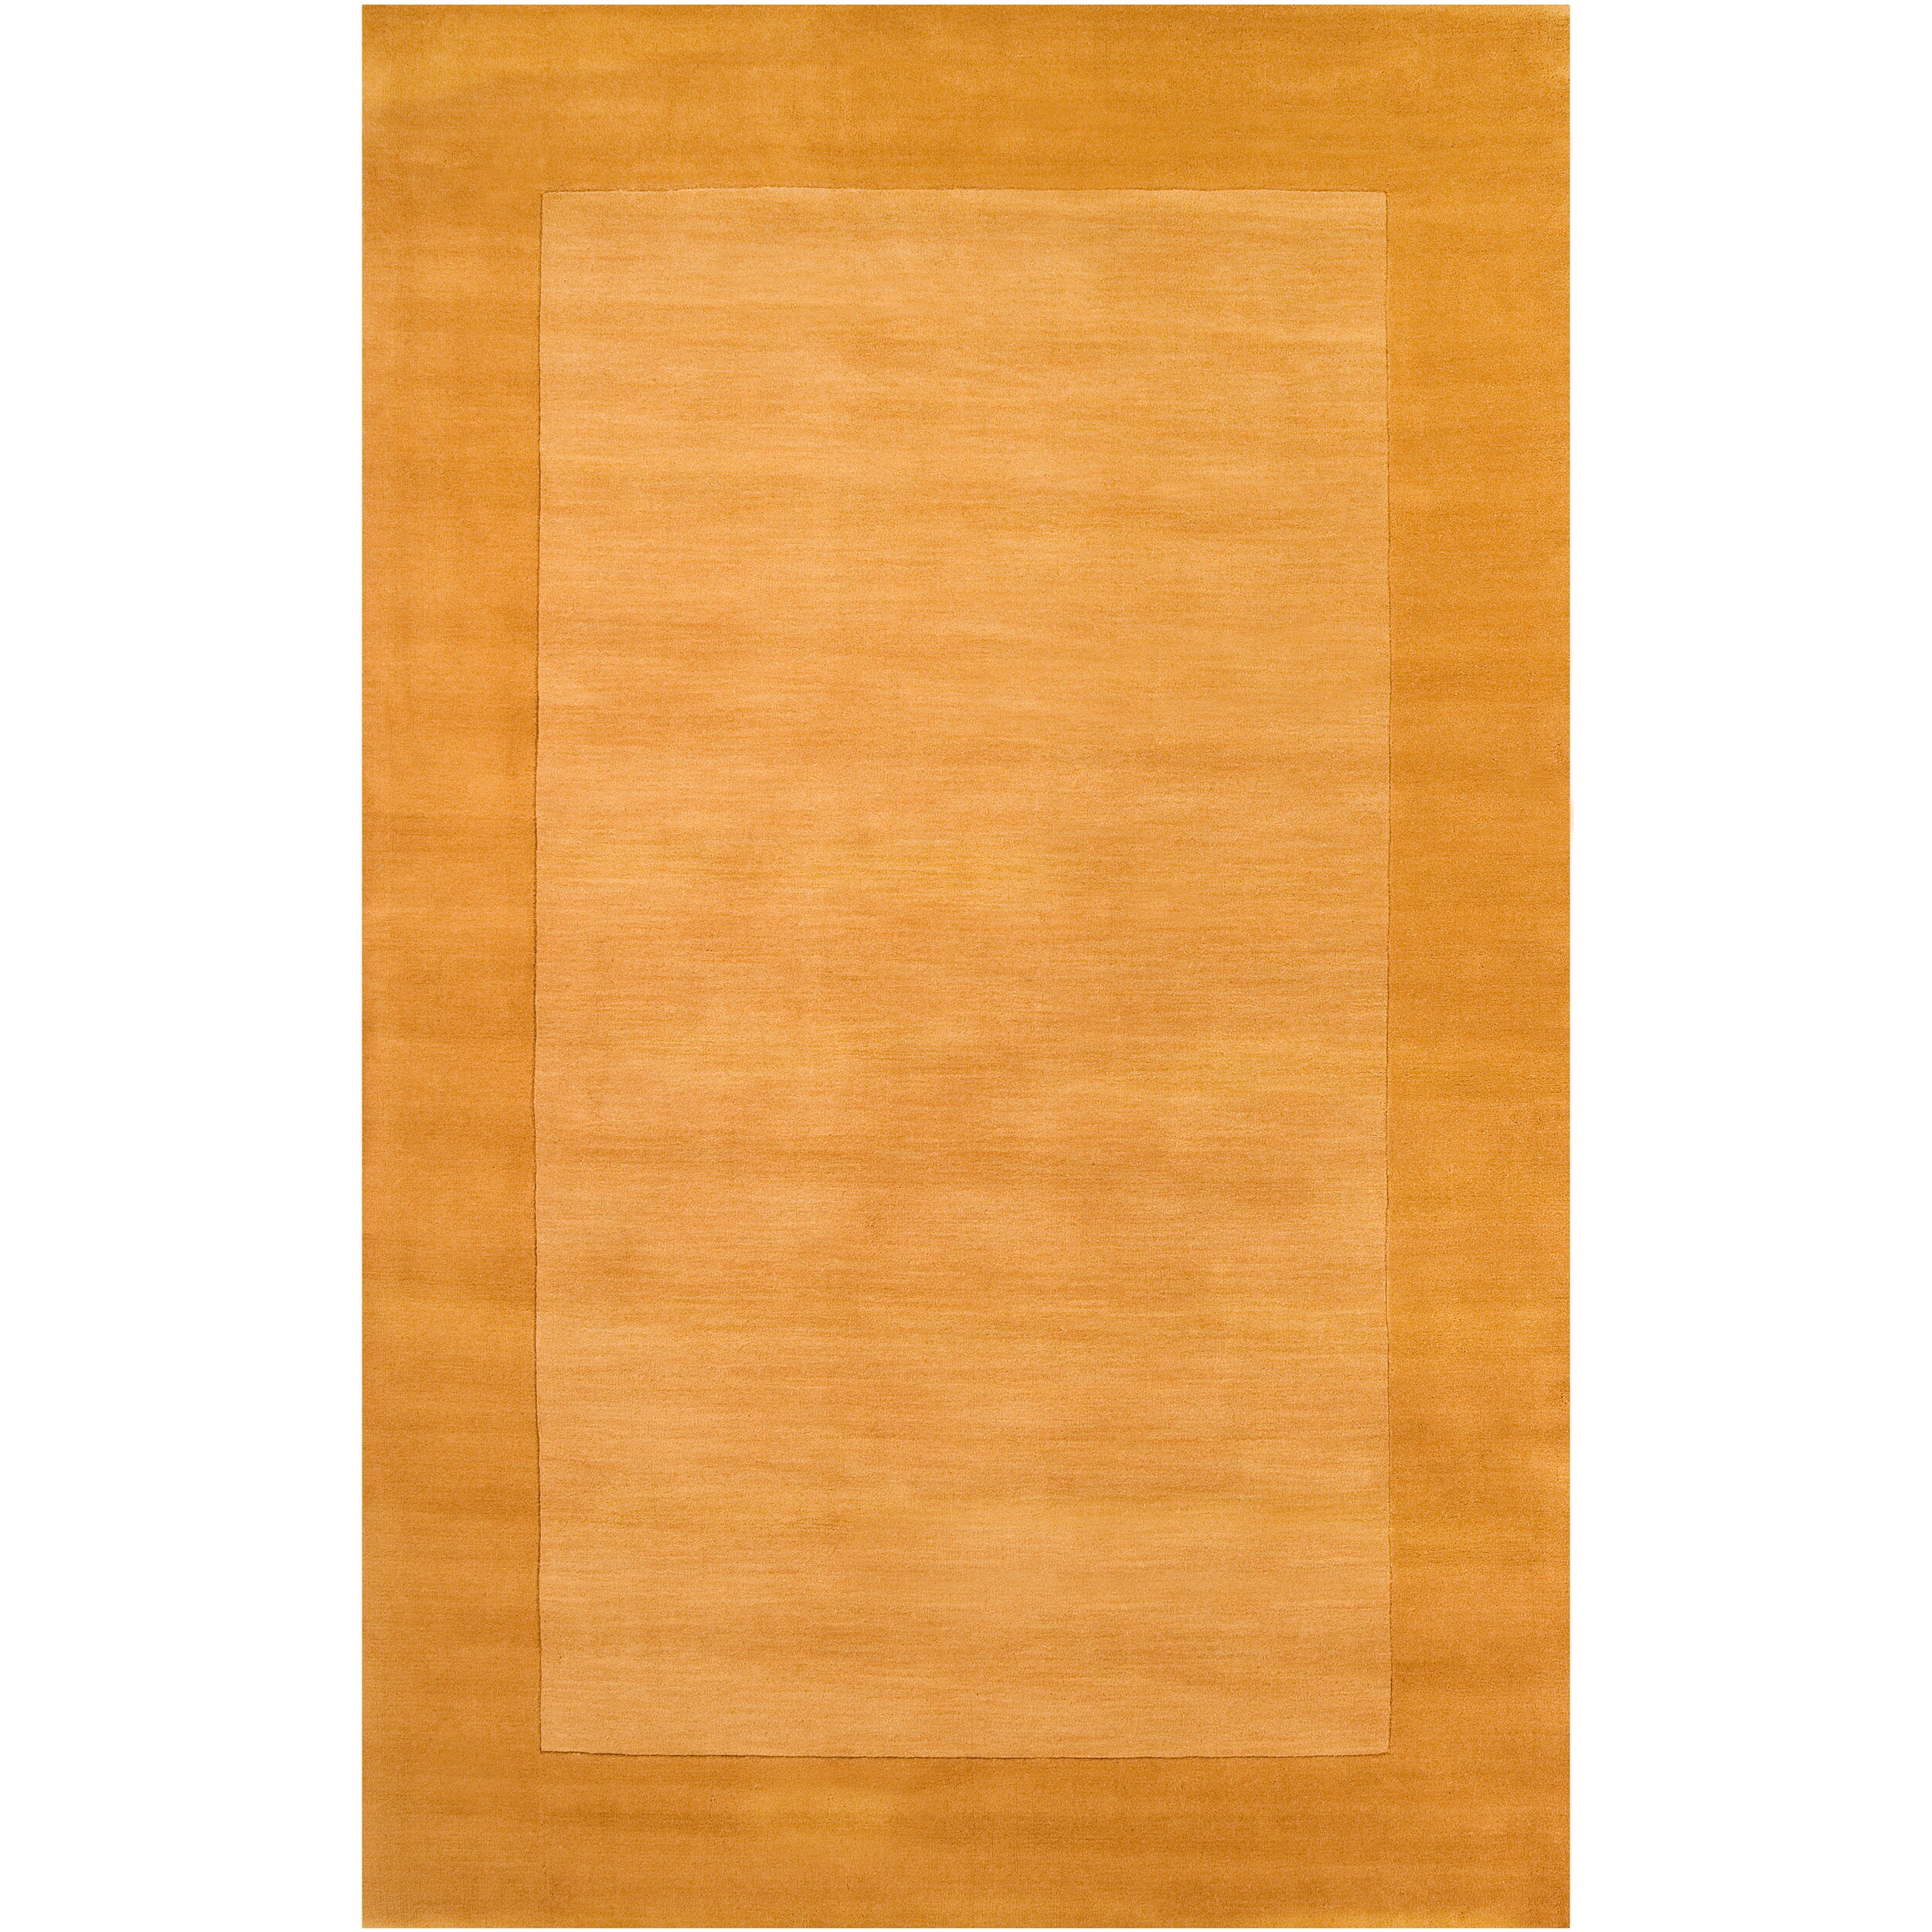 Hand crafted Solid Yellow Tone On Tone Bordered Diss Wool Rug (12 x